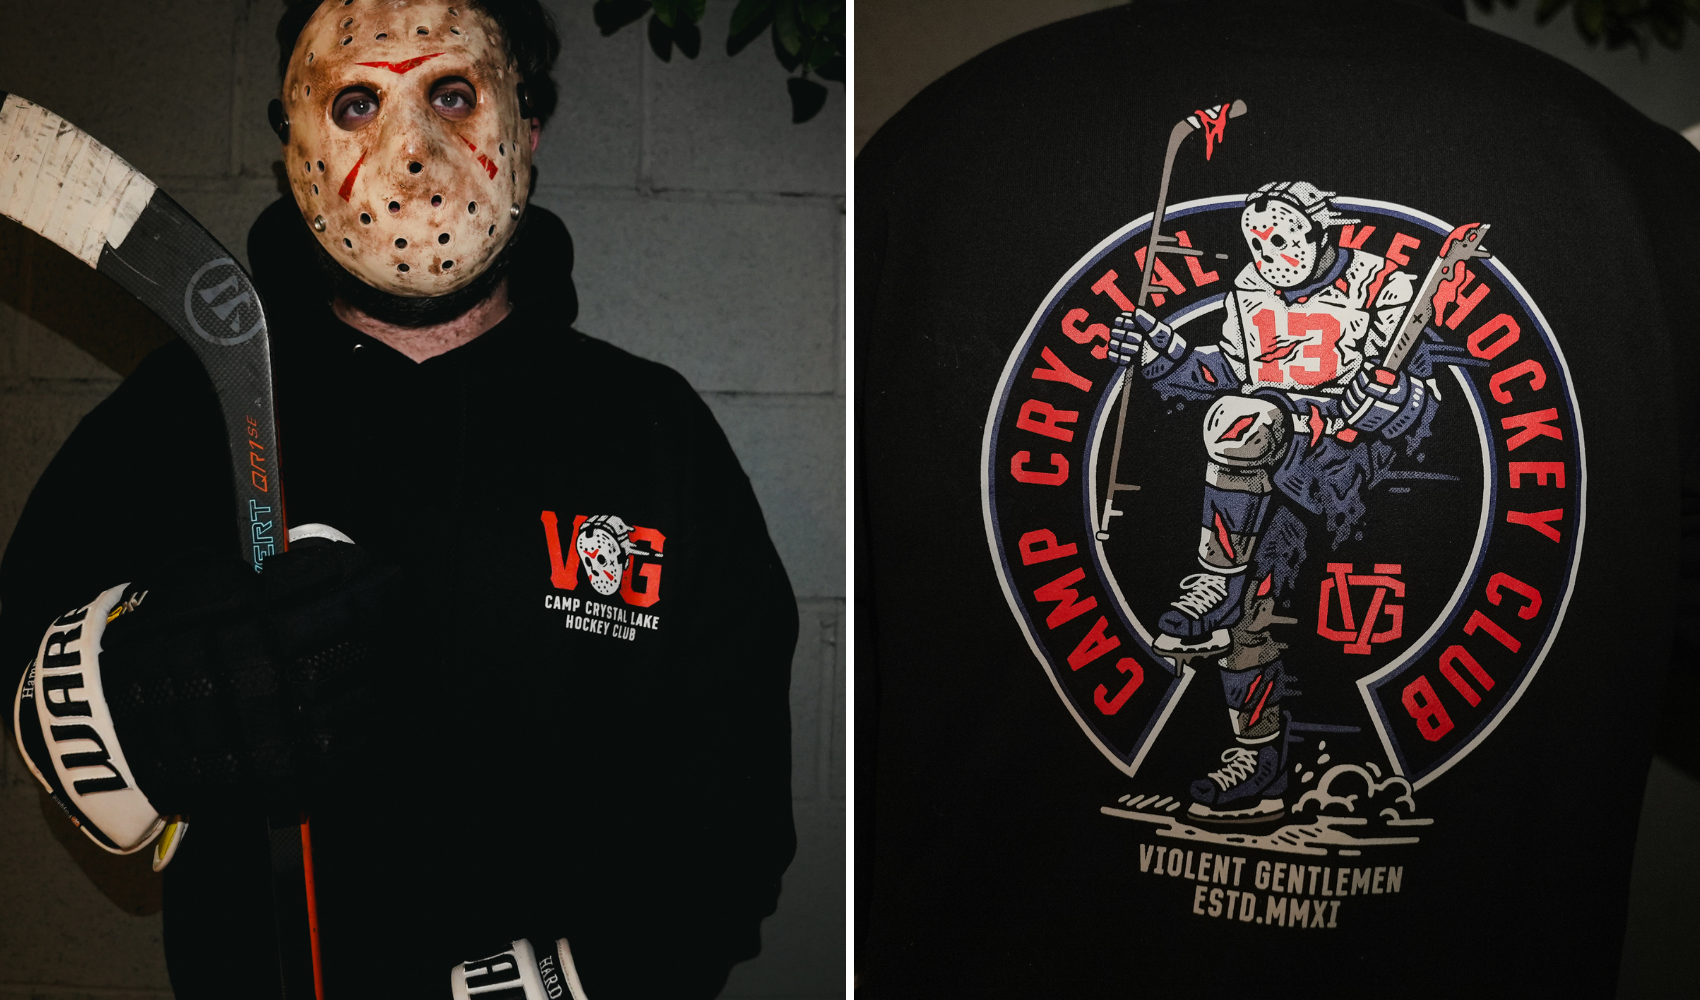 Lifetipsforbetterliving Hockey Clothing Company Hockey Club new Jason Cheevers Jason Celly design available for Friday the 13th. Limited edition hockey t-shirt and hockey pullover hood. Great hockey gift for all hockey players and hockey fans